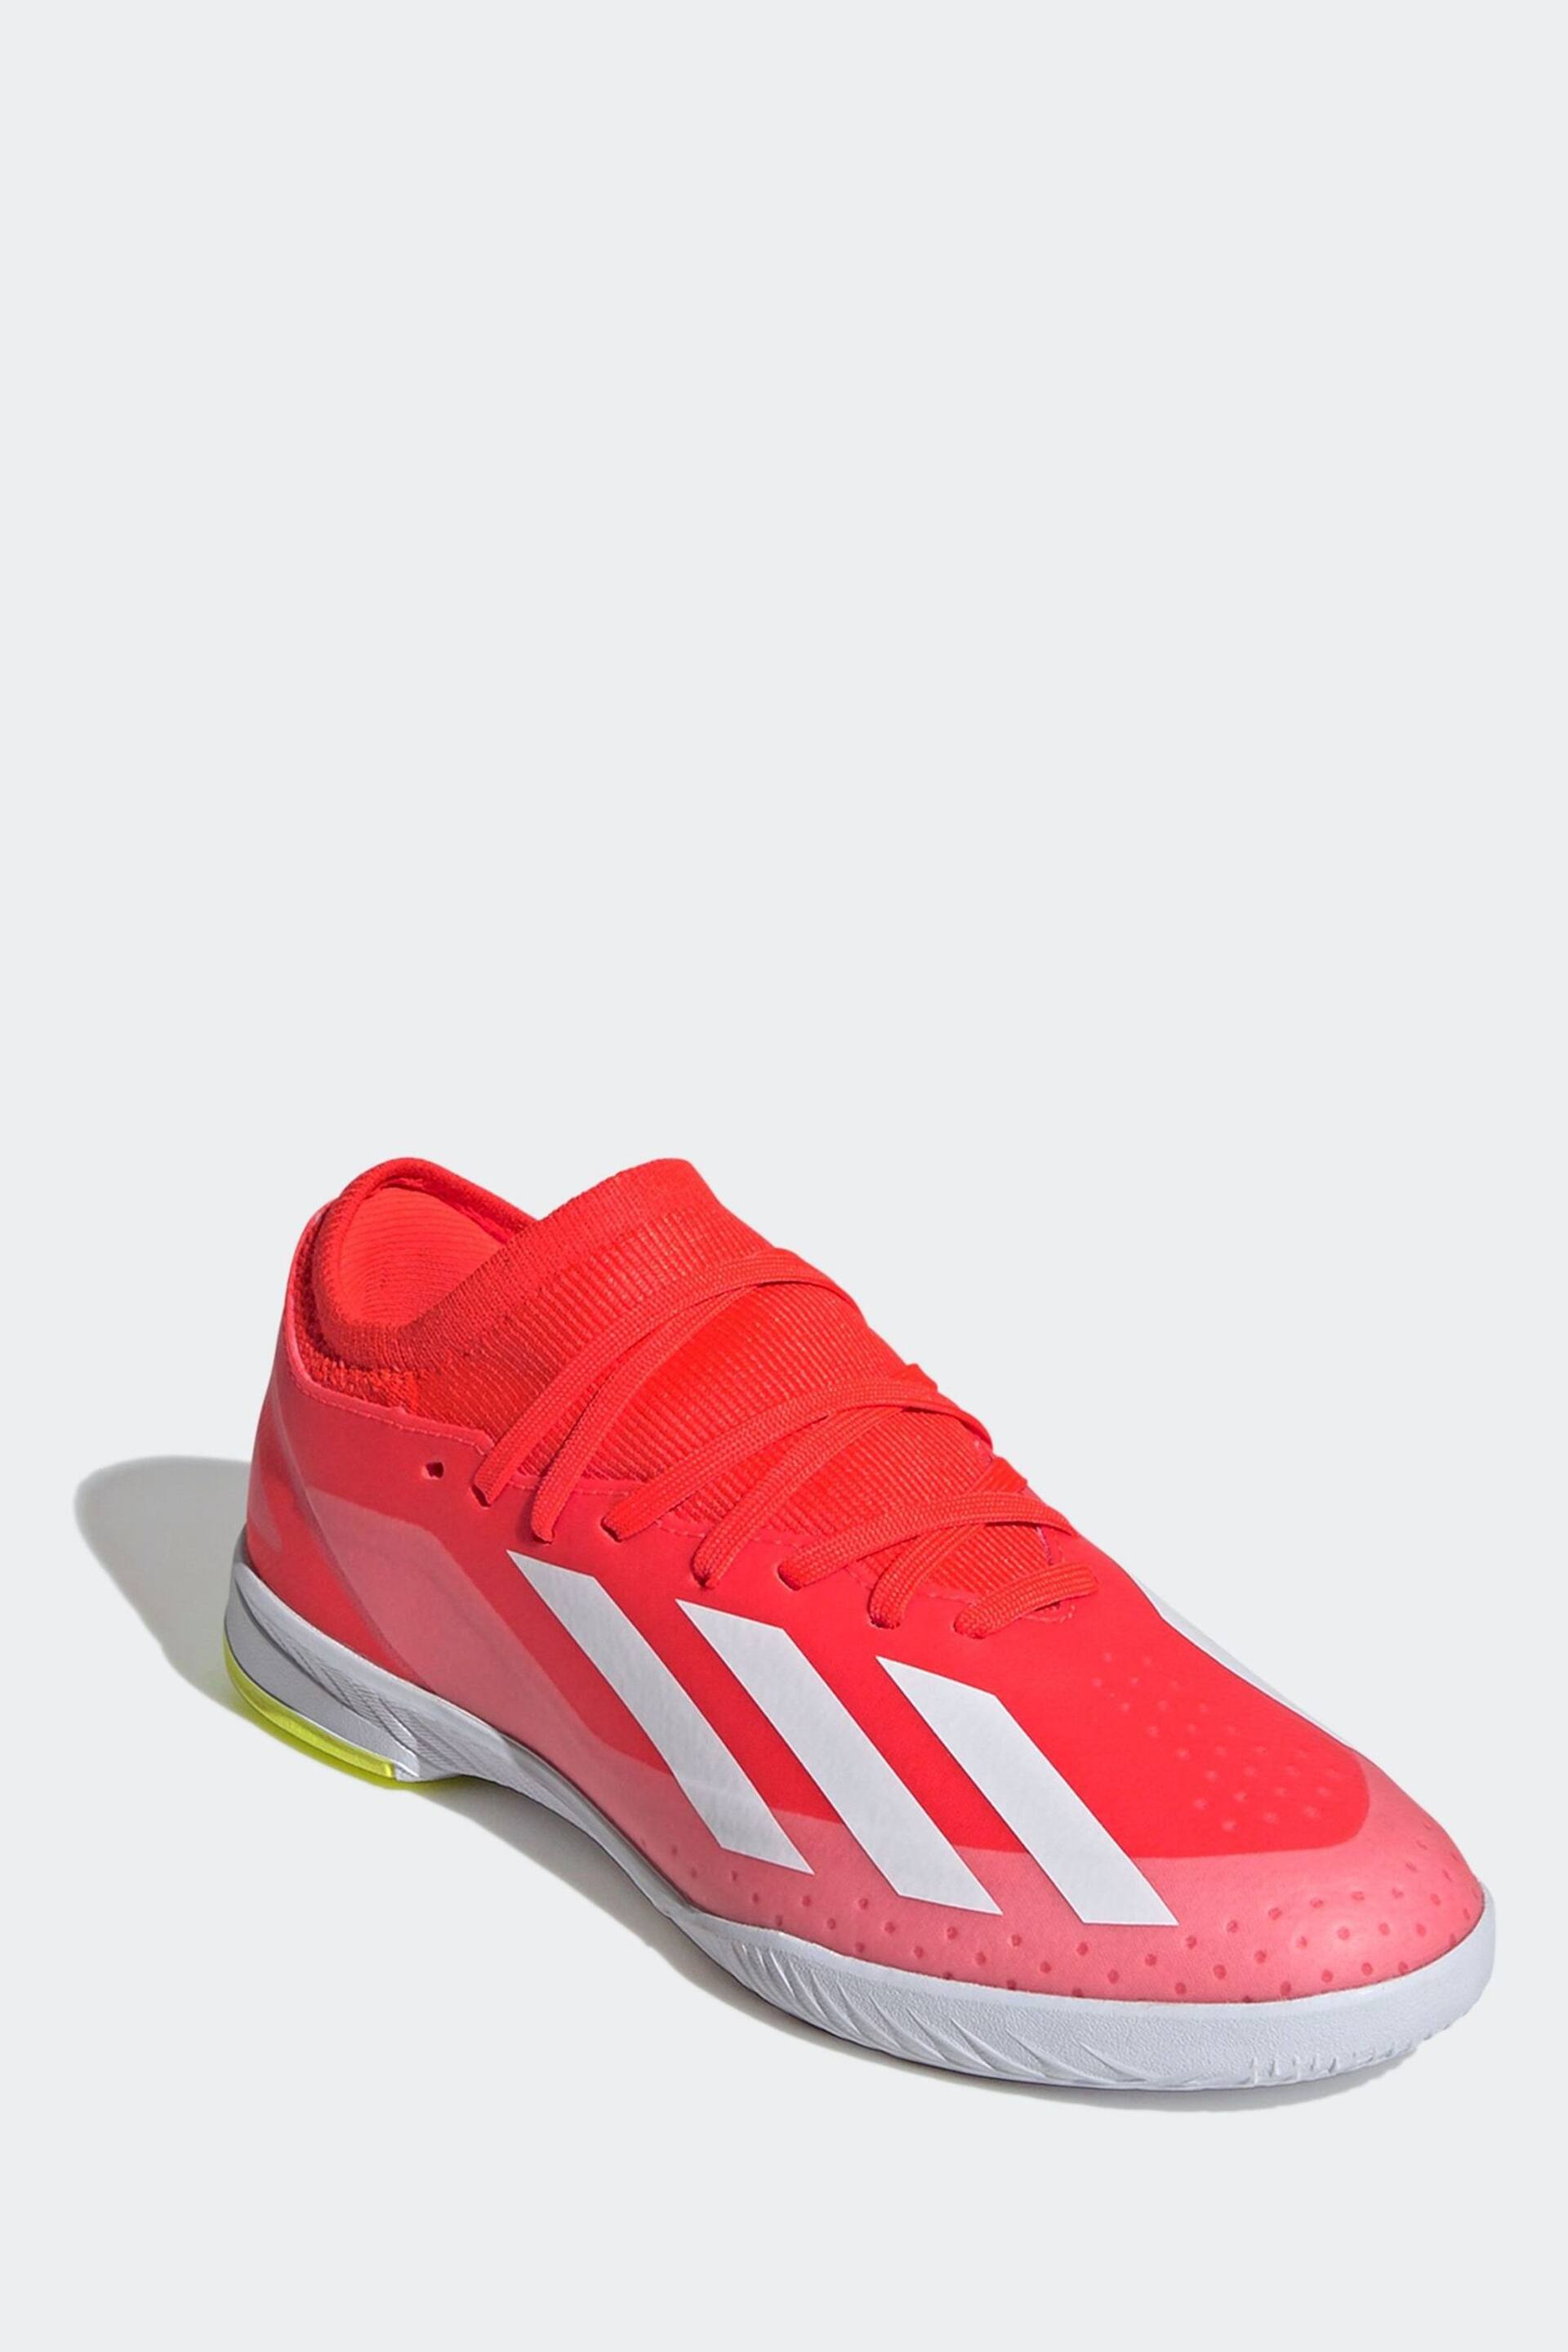 adidas Red/White Football X Crazyfast League Indoor Kids Boots - Image 4 of 20